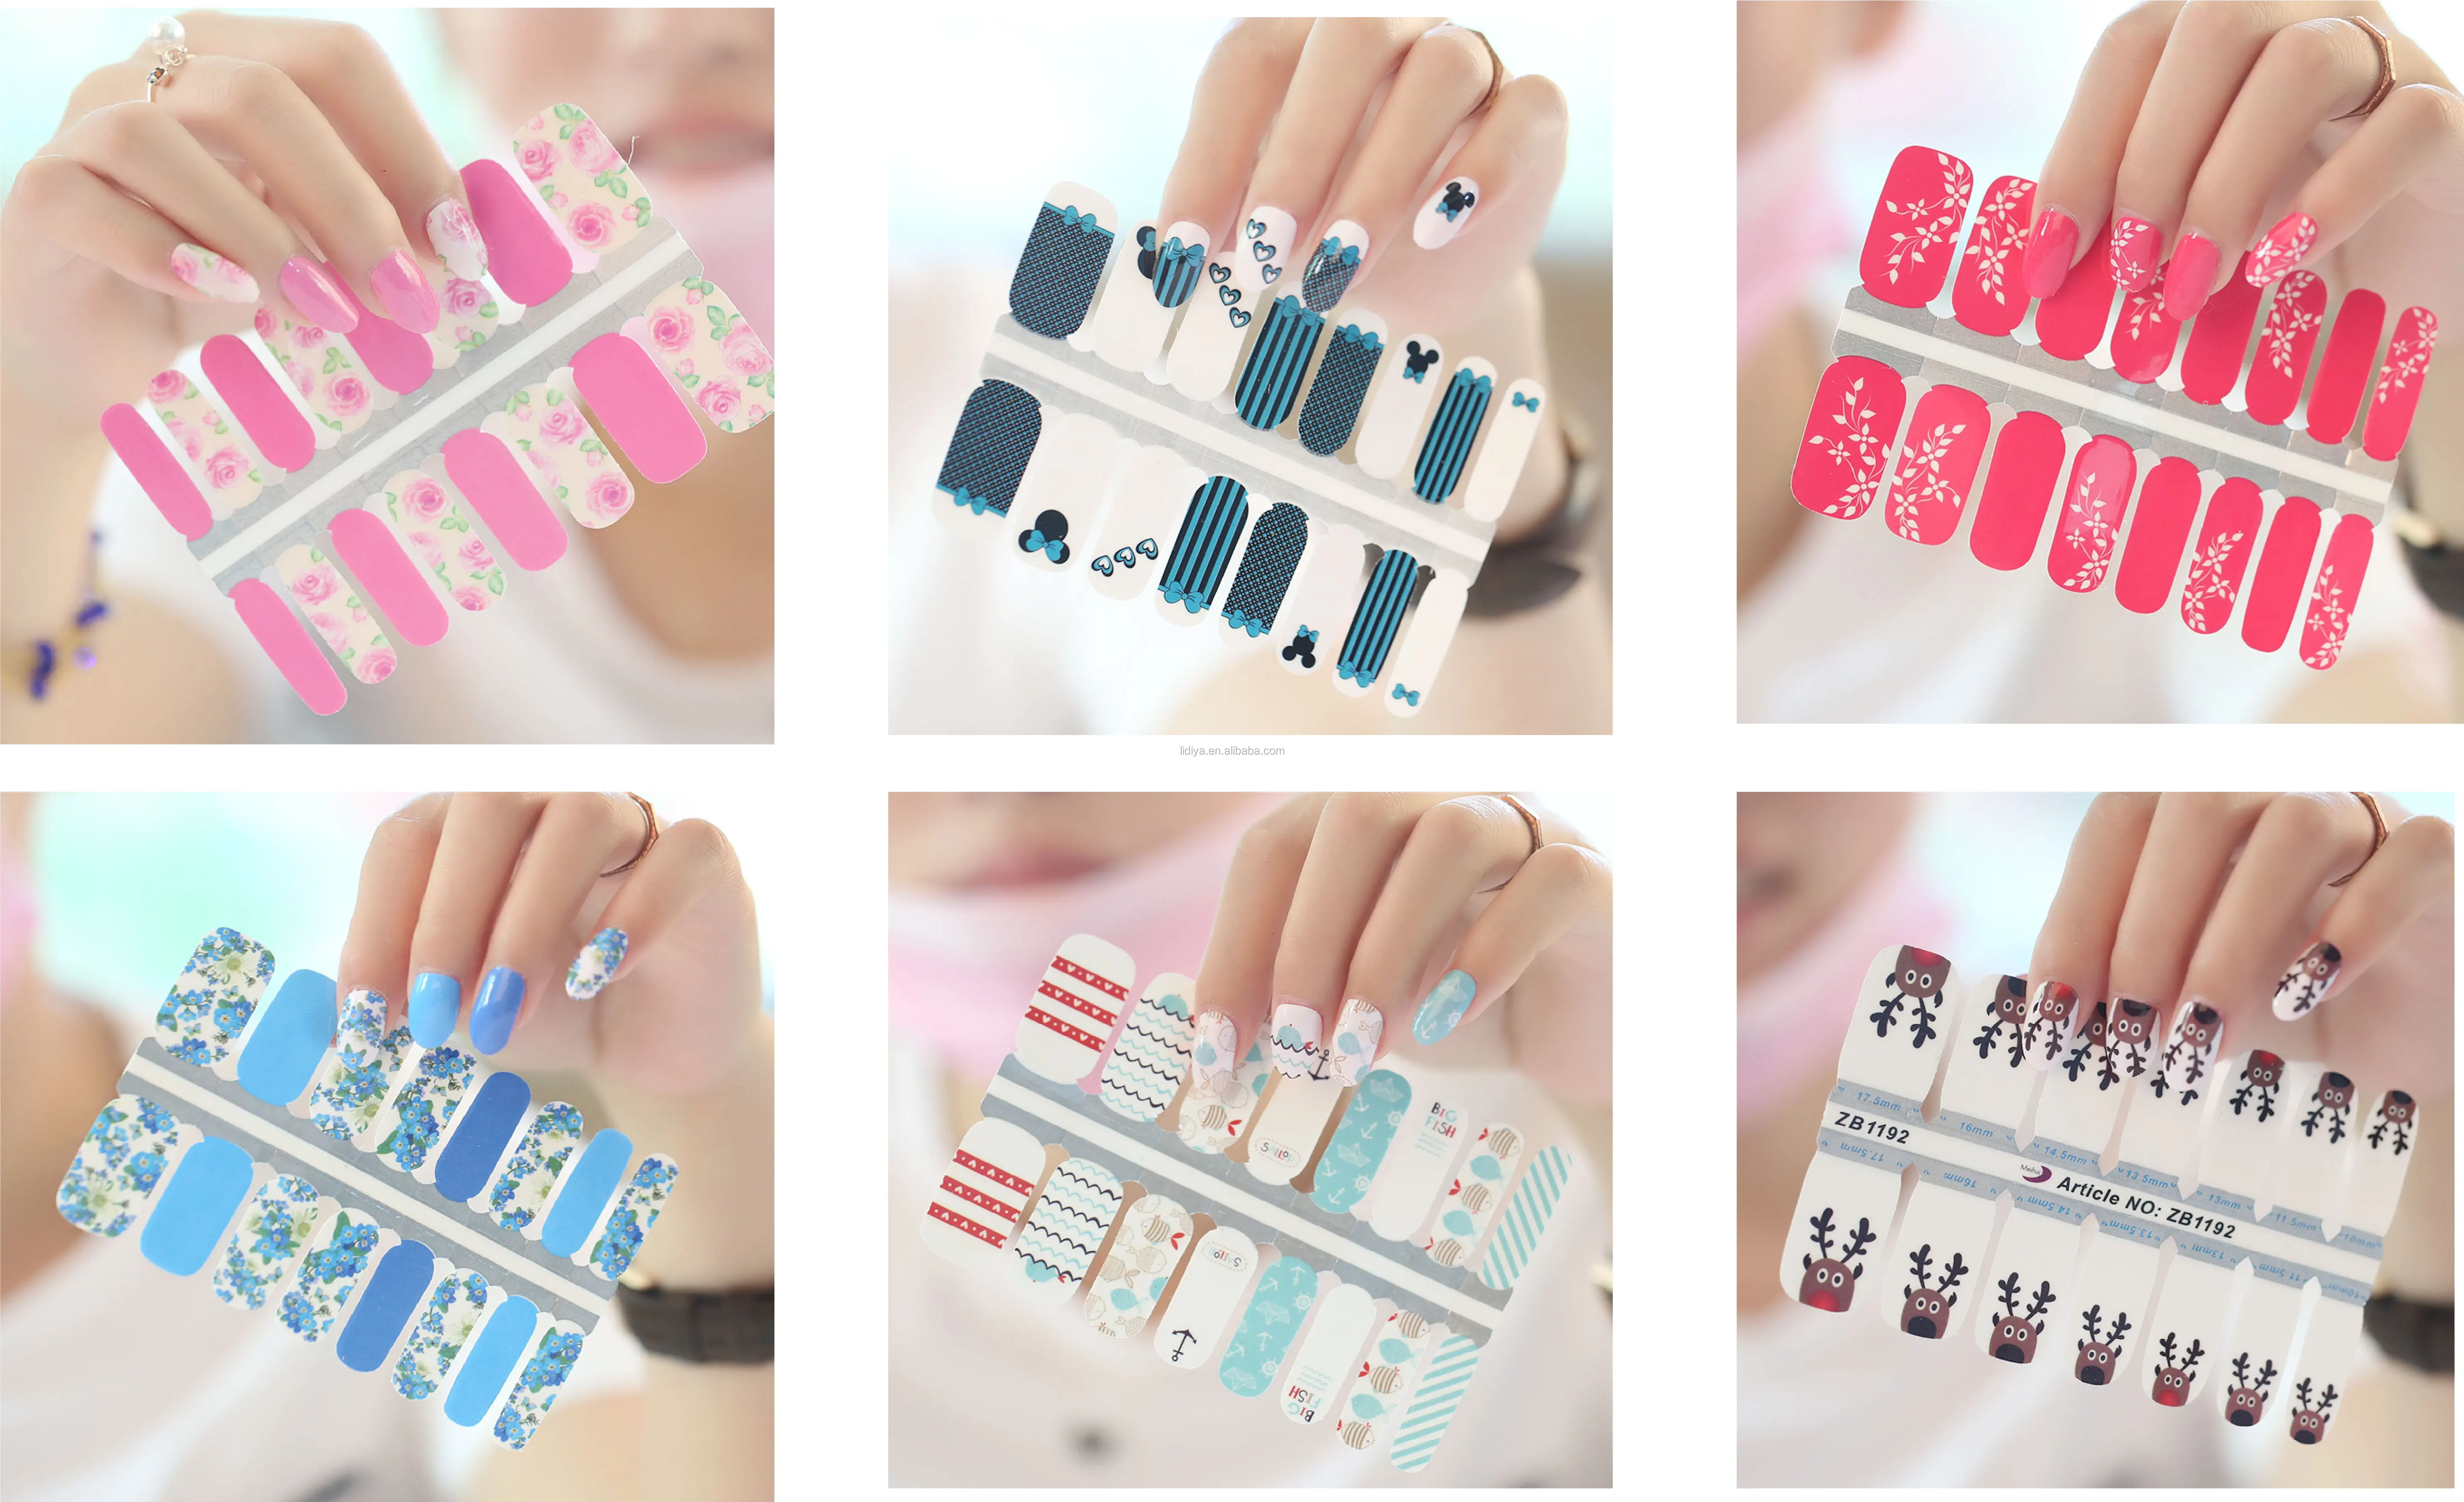 1. Wholesale Nail Art Supplies from China - wide 4